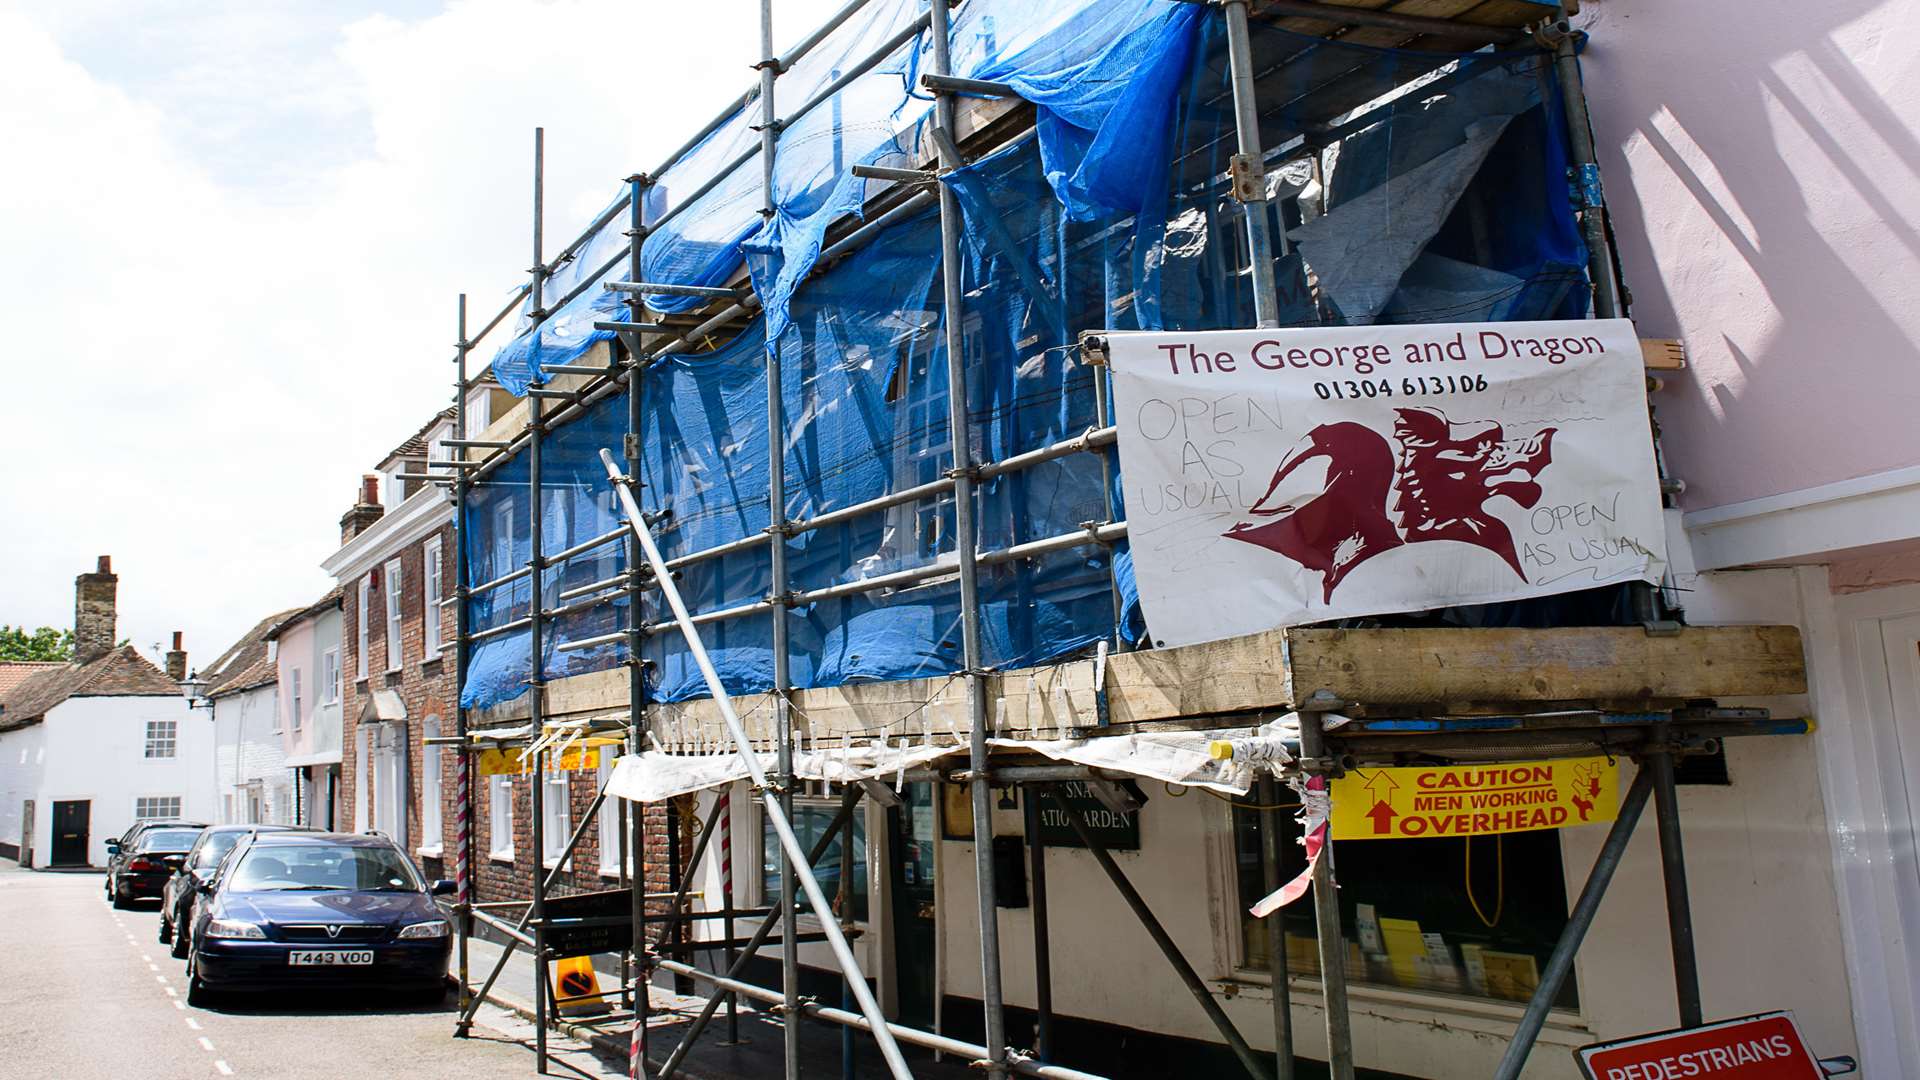 The pub which has had scaffolding up for two years is finally getting repair work done